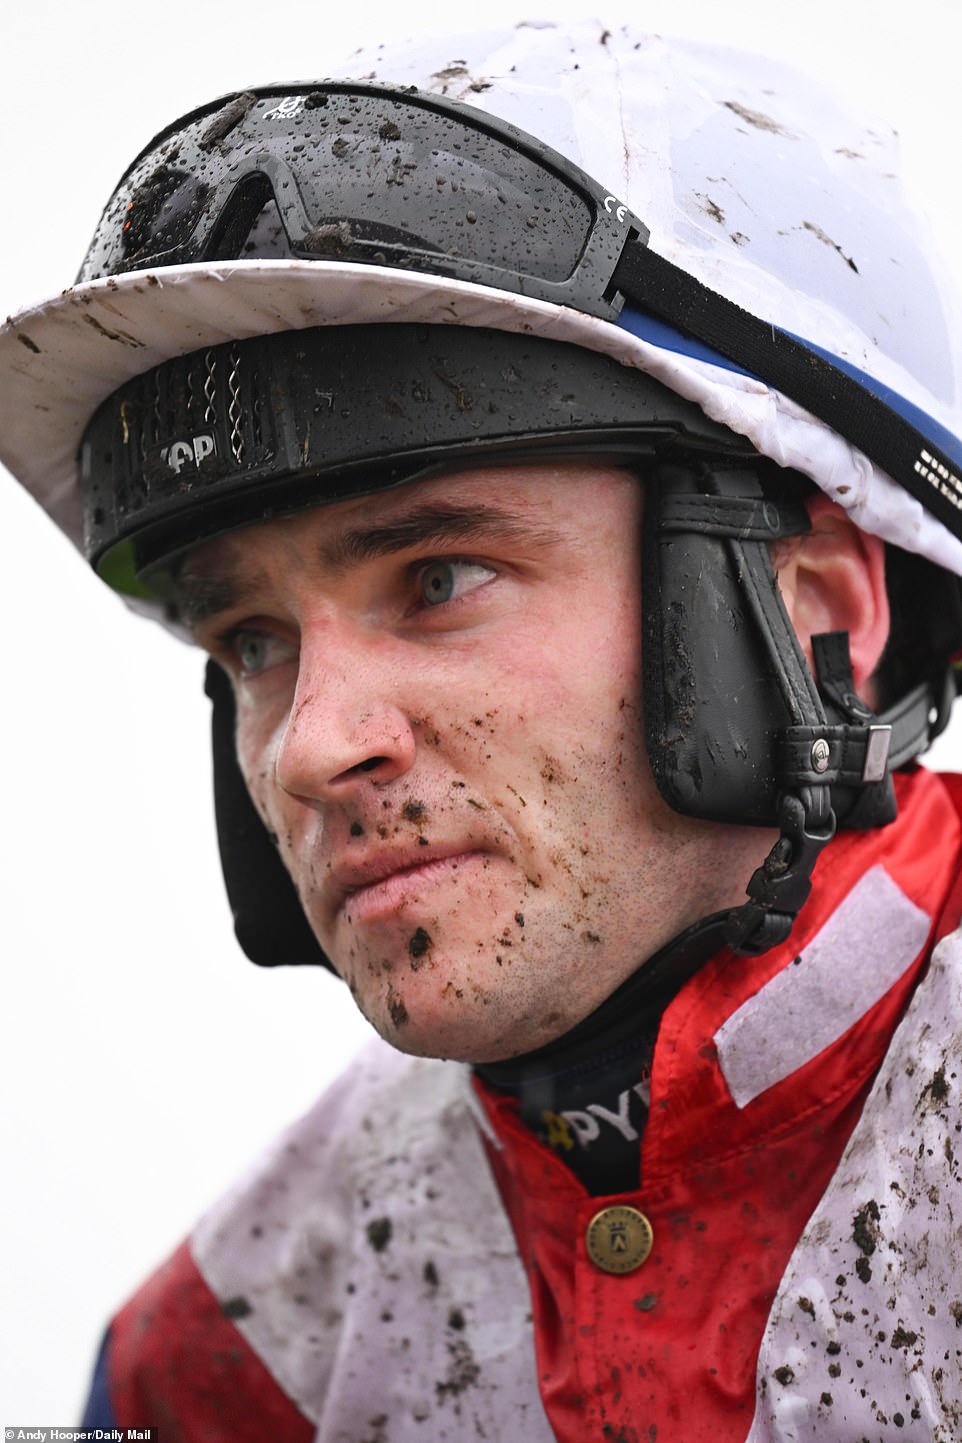 It was a bit soft underfoot this weekend as we saw a jockey returning to the paddock with mud splattered all over his face